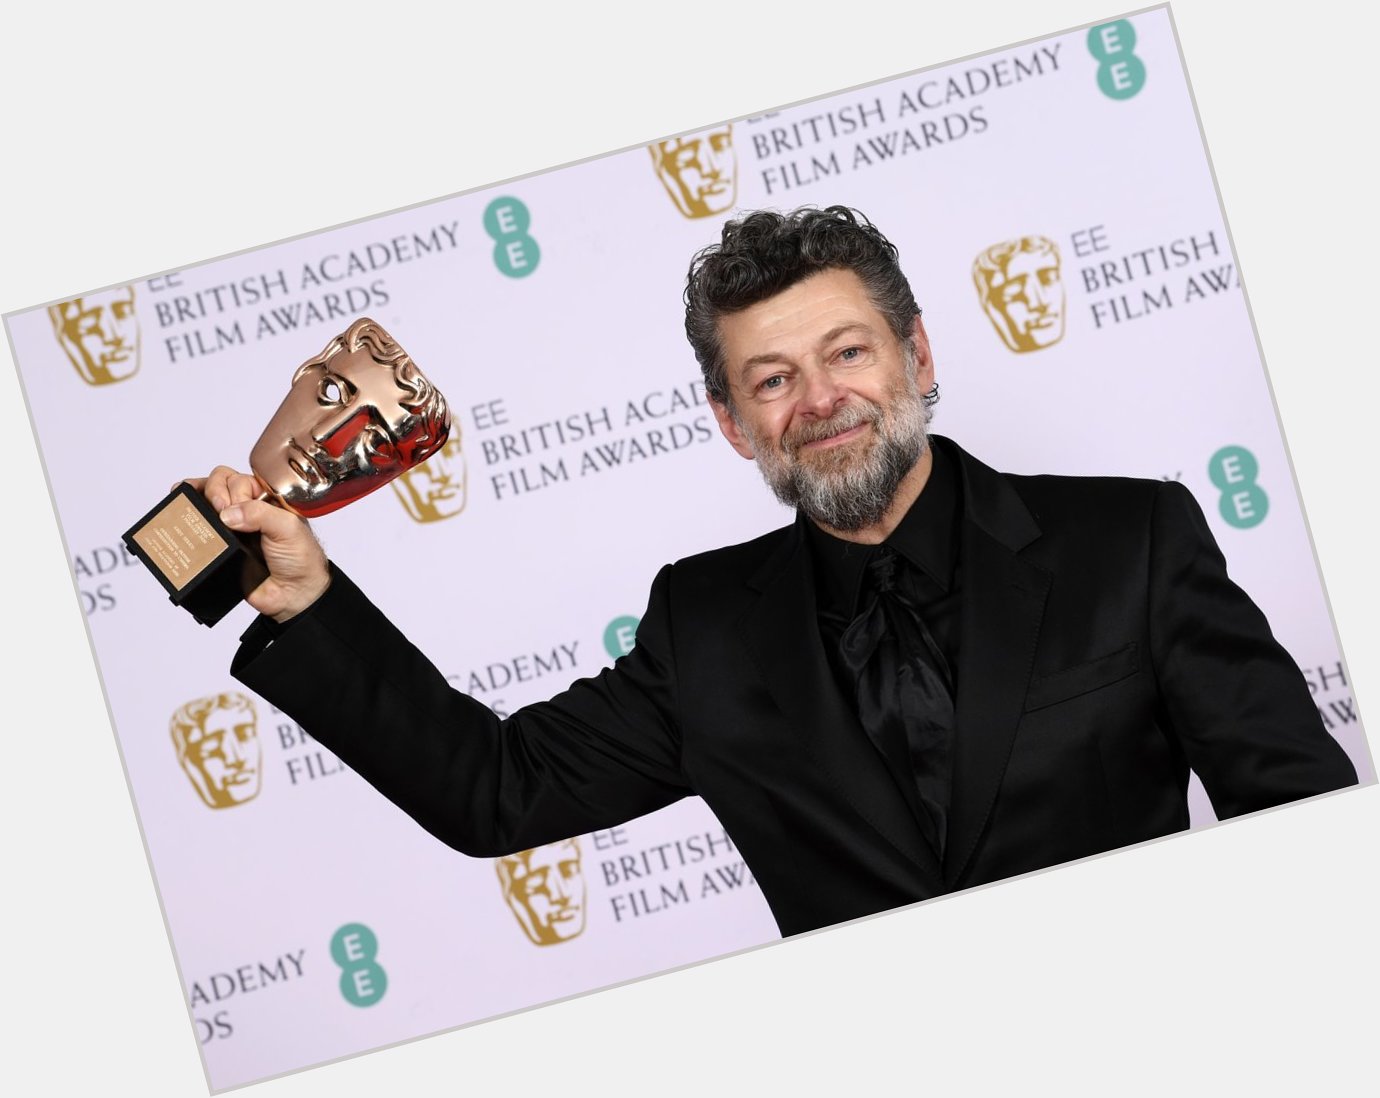 Happy Birthday to Andy Serkis who received the BAFTA this year for Outstanding British Contribution to Cinema! 